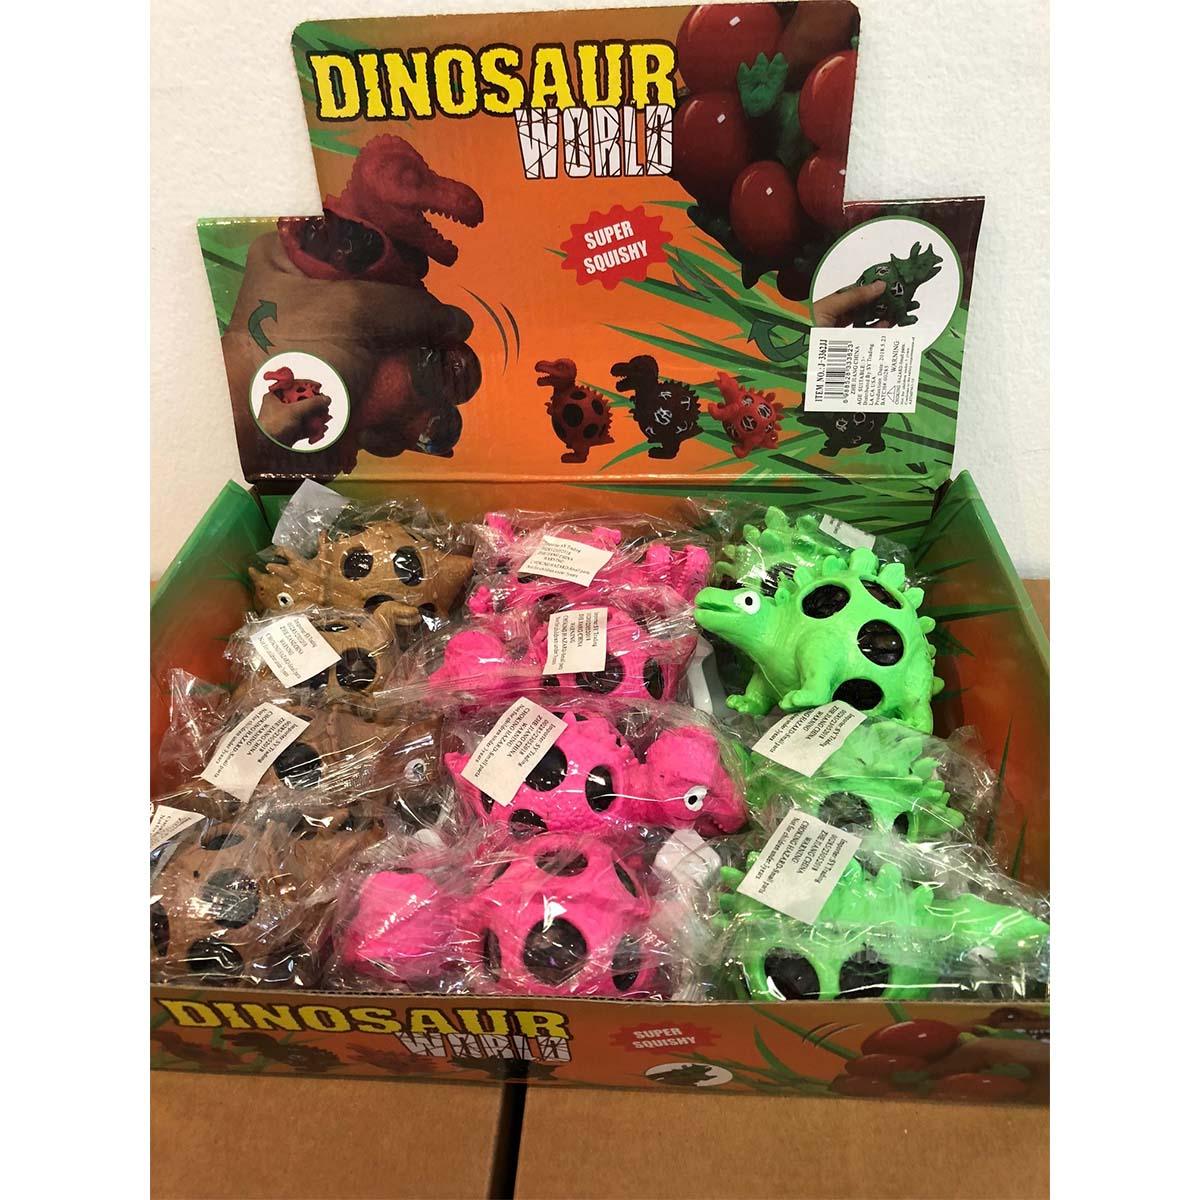 Buy Kids Birthday Dinosaur-shaped squeeze ball - Assortment sold at Party Expert